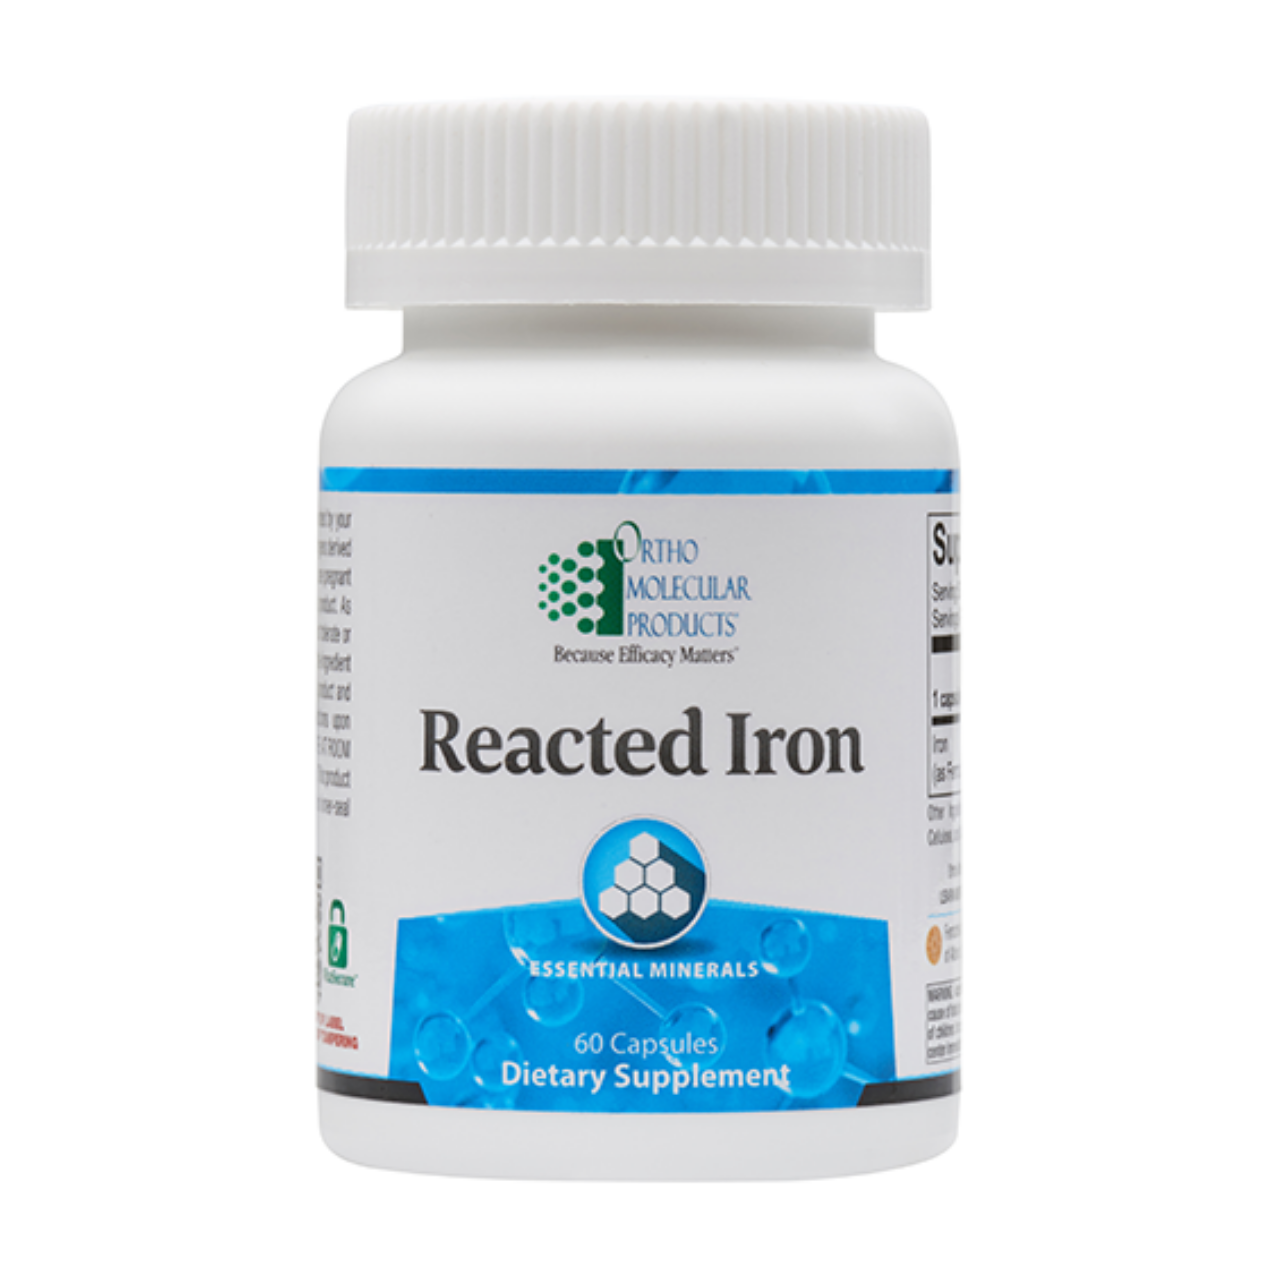 Ortho Molecular Reacted Iron for Bone, Brain, and Heart Support